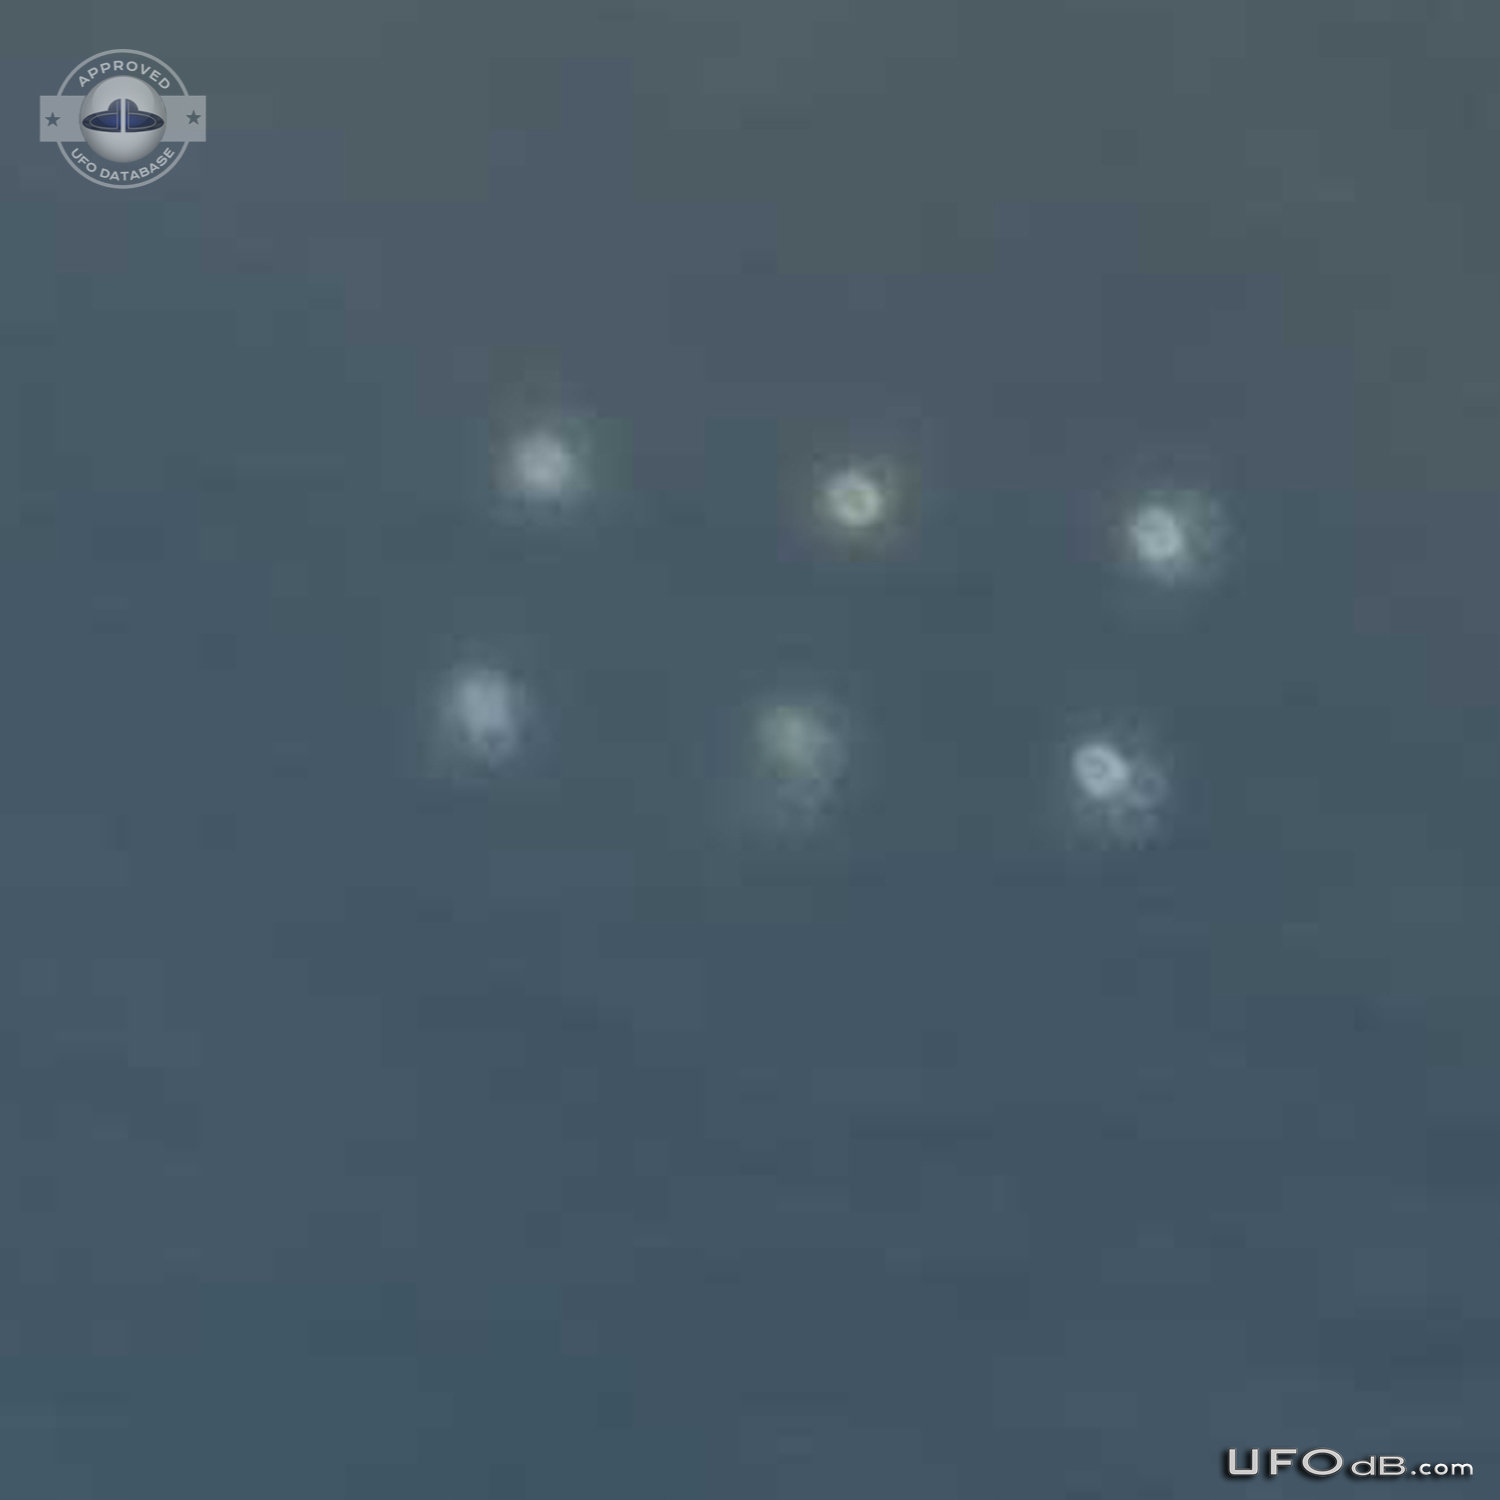 Pictures shot from bus reveals six ufos in a rectangle formation UFO Picture #383-6